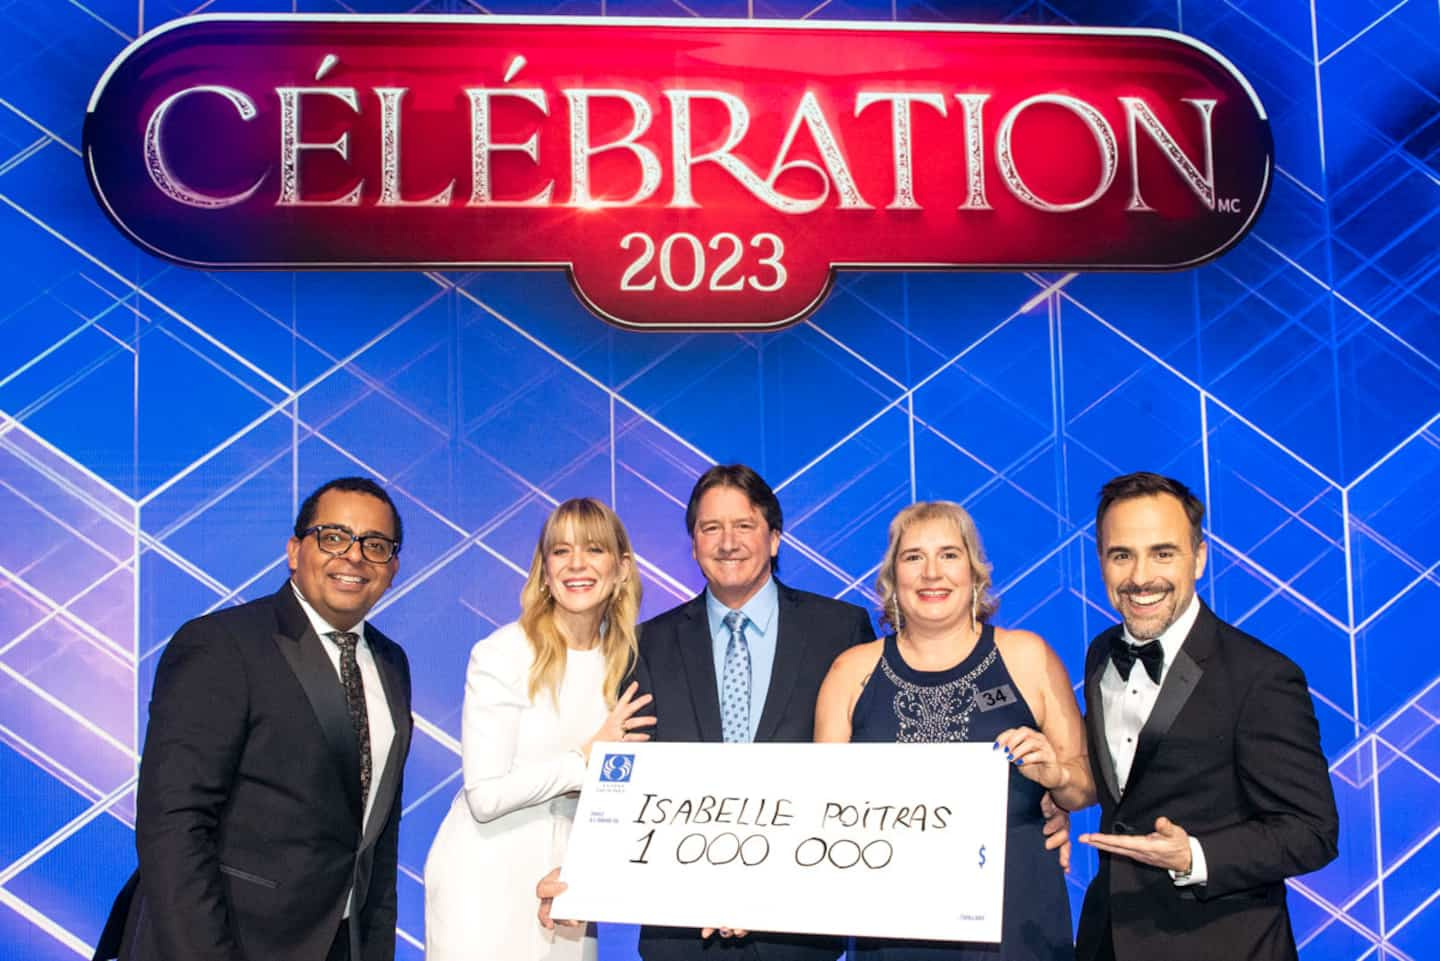 Gala Celebration 2023: a woman from Ormstown wins the million